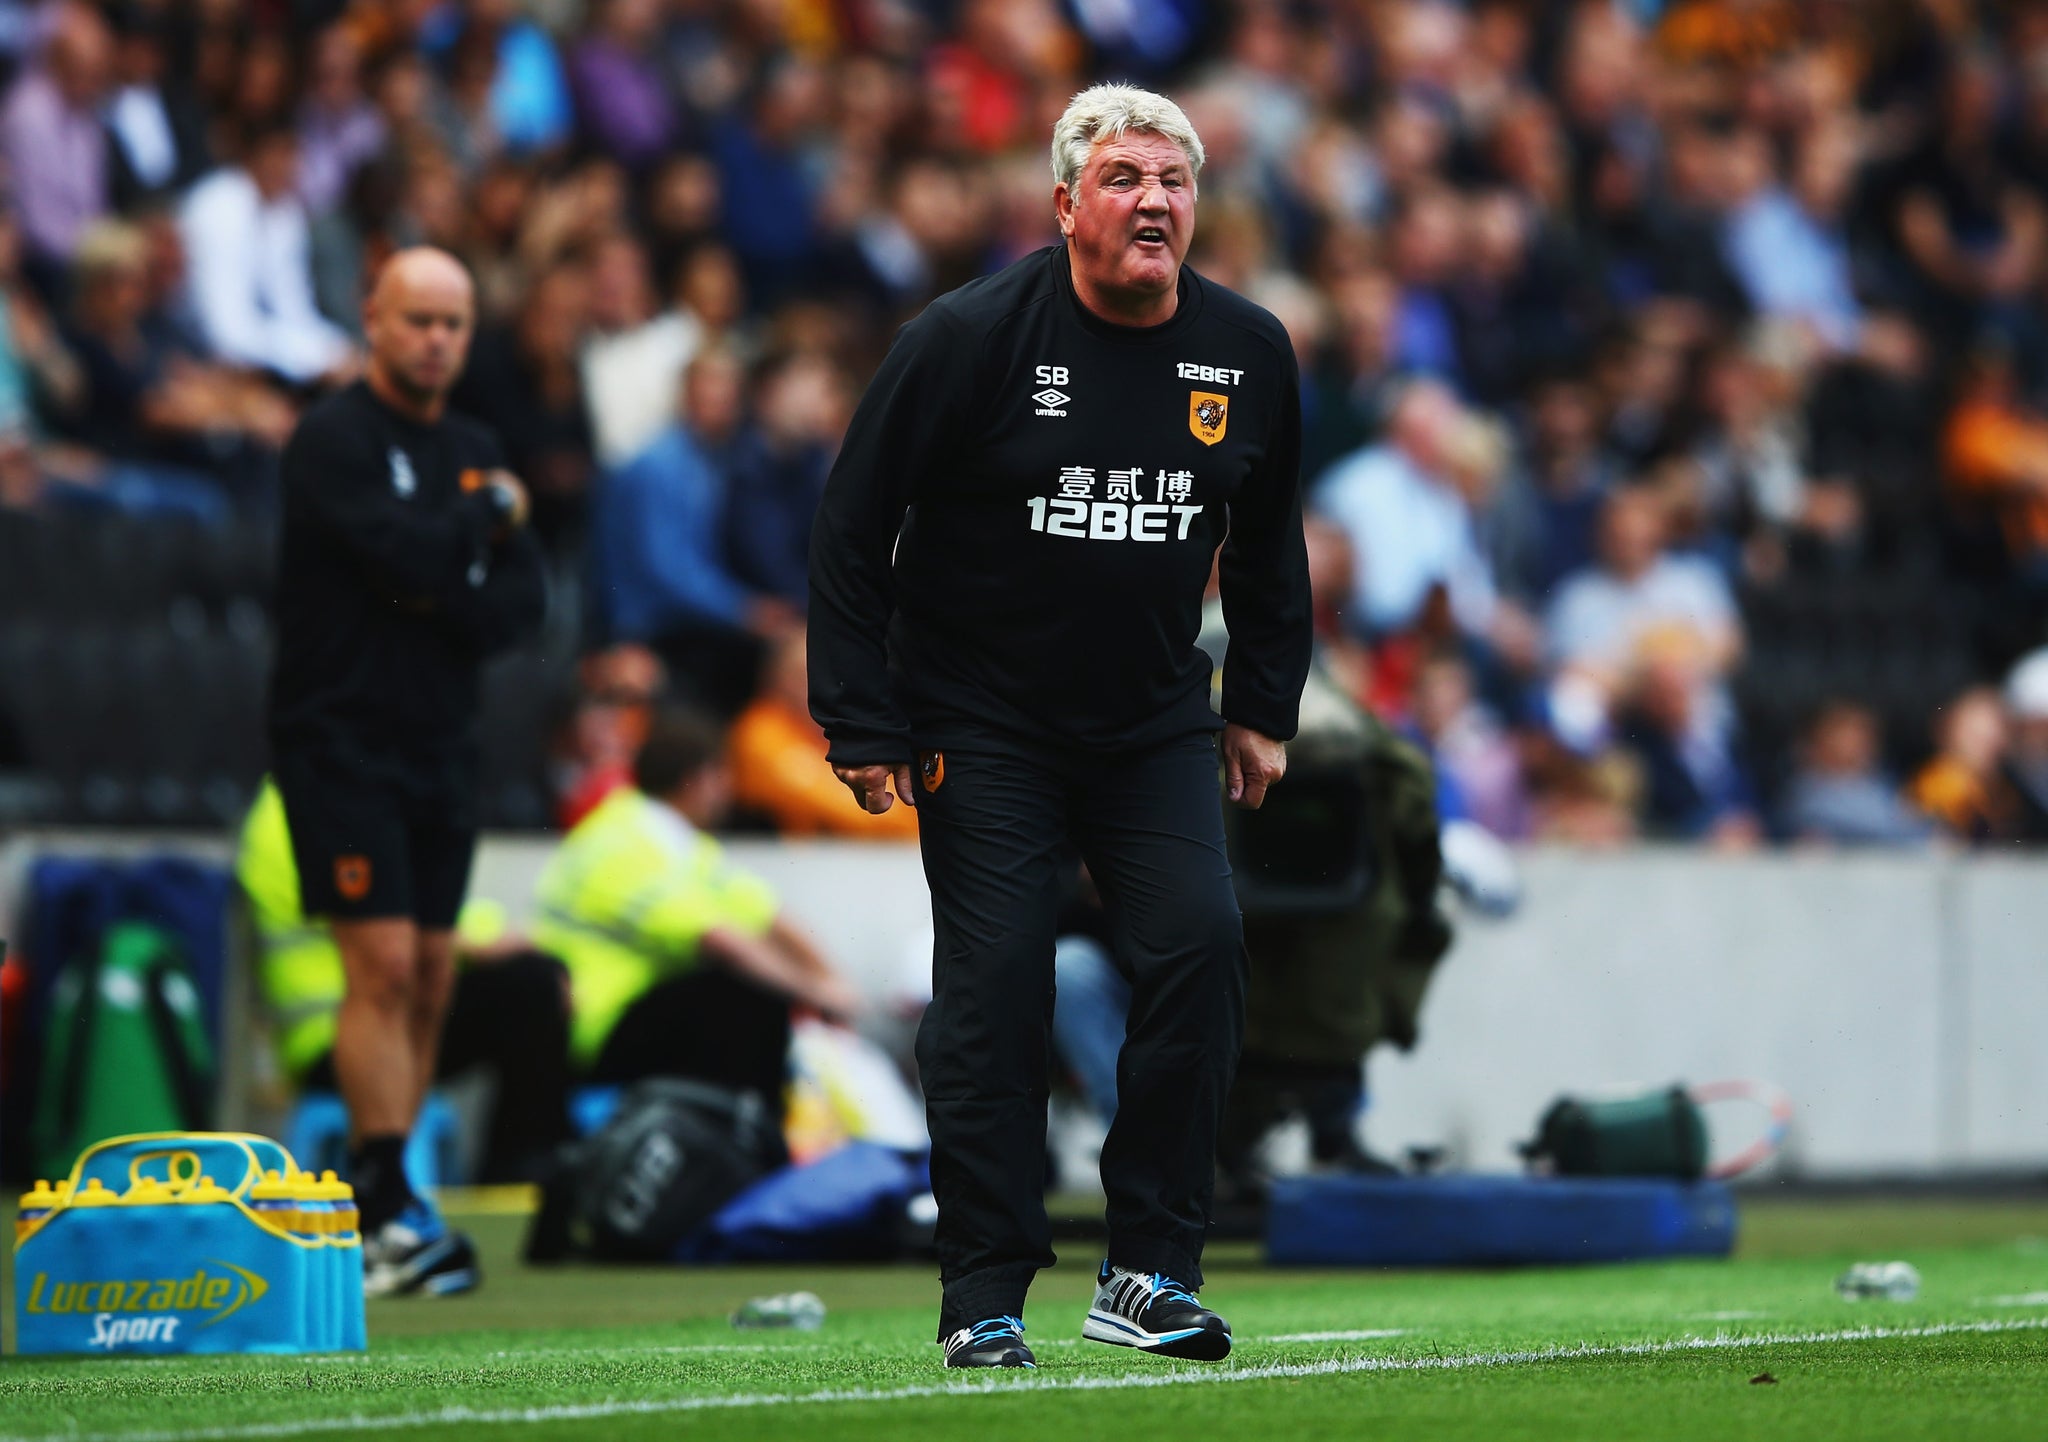 Steve Bruce was visibly furious with the decision but his side remained calm and refused to let Stoke City's possession game tire them out.